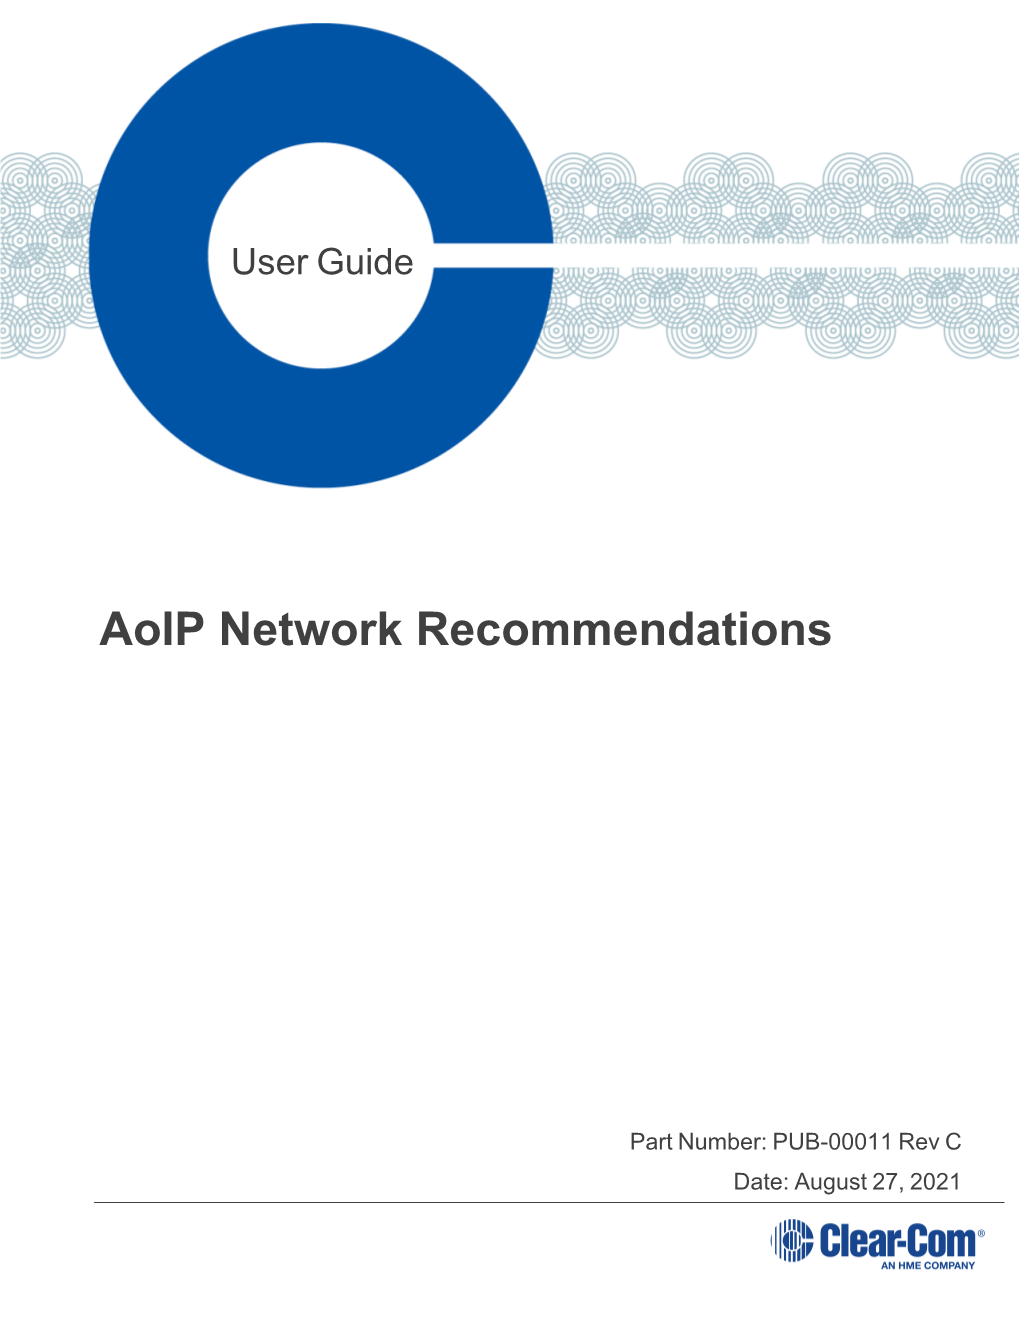 Clear-Com Aoip Network Recommendations Guide